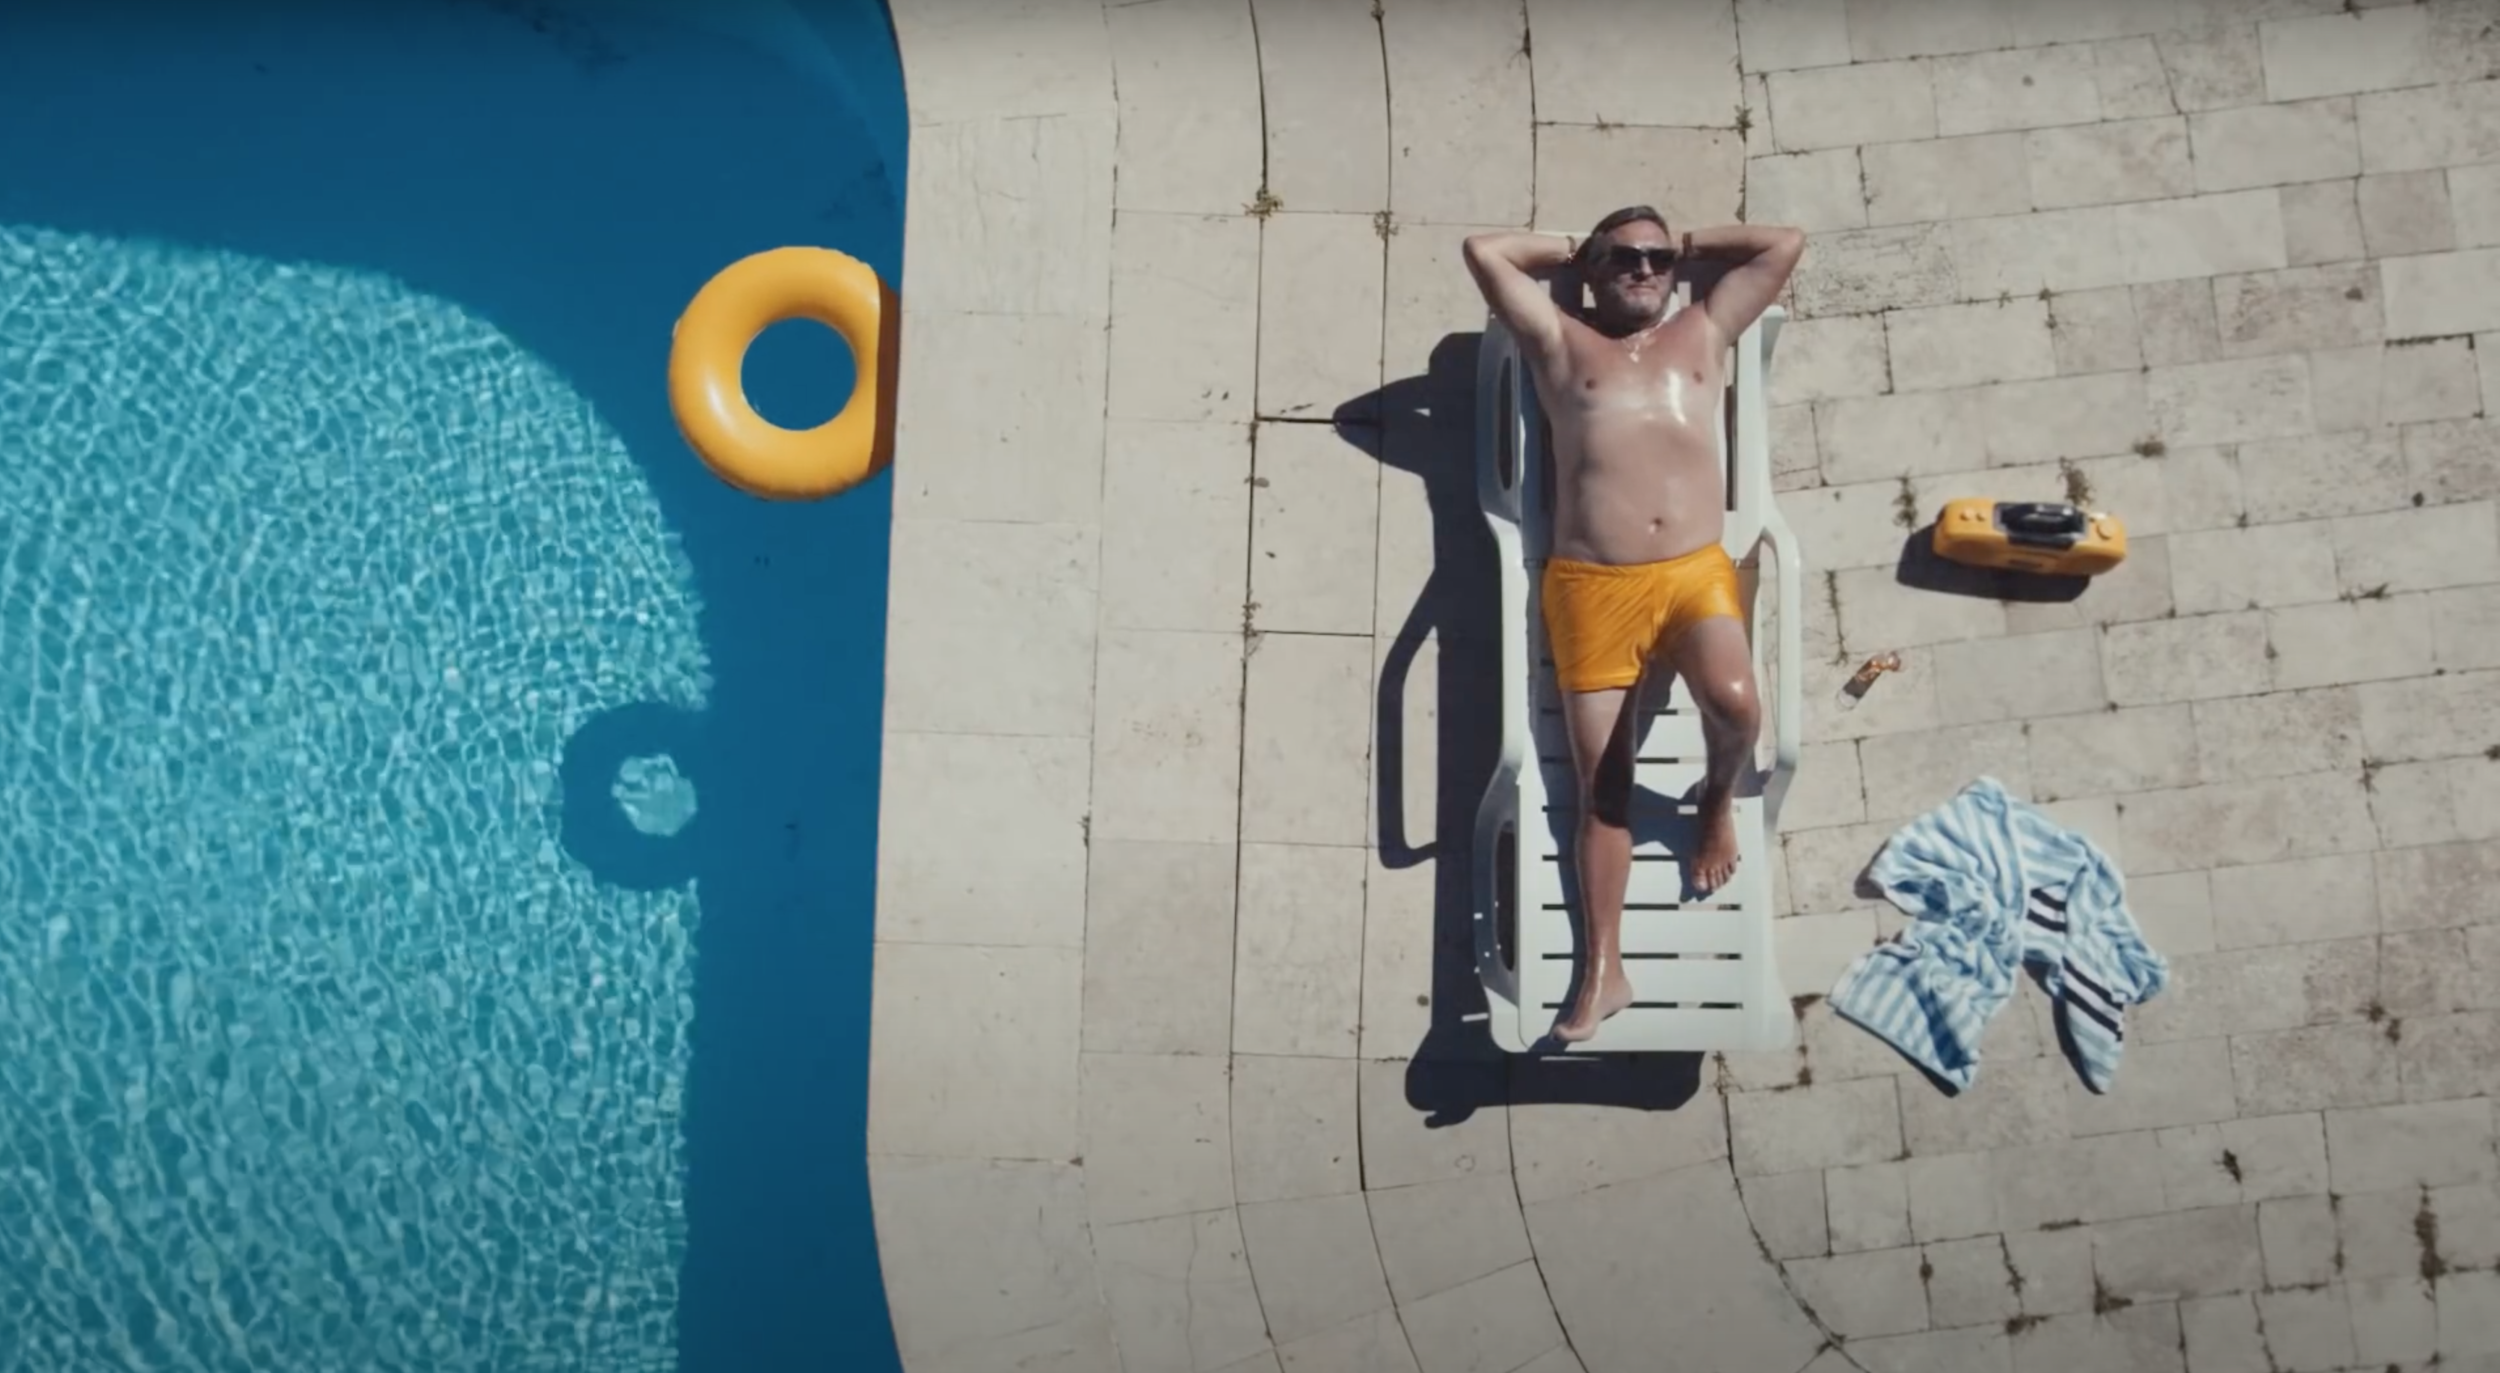 Ballantine's - Stay True: There's No Wrong Way 